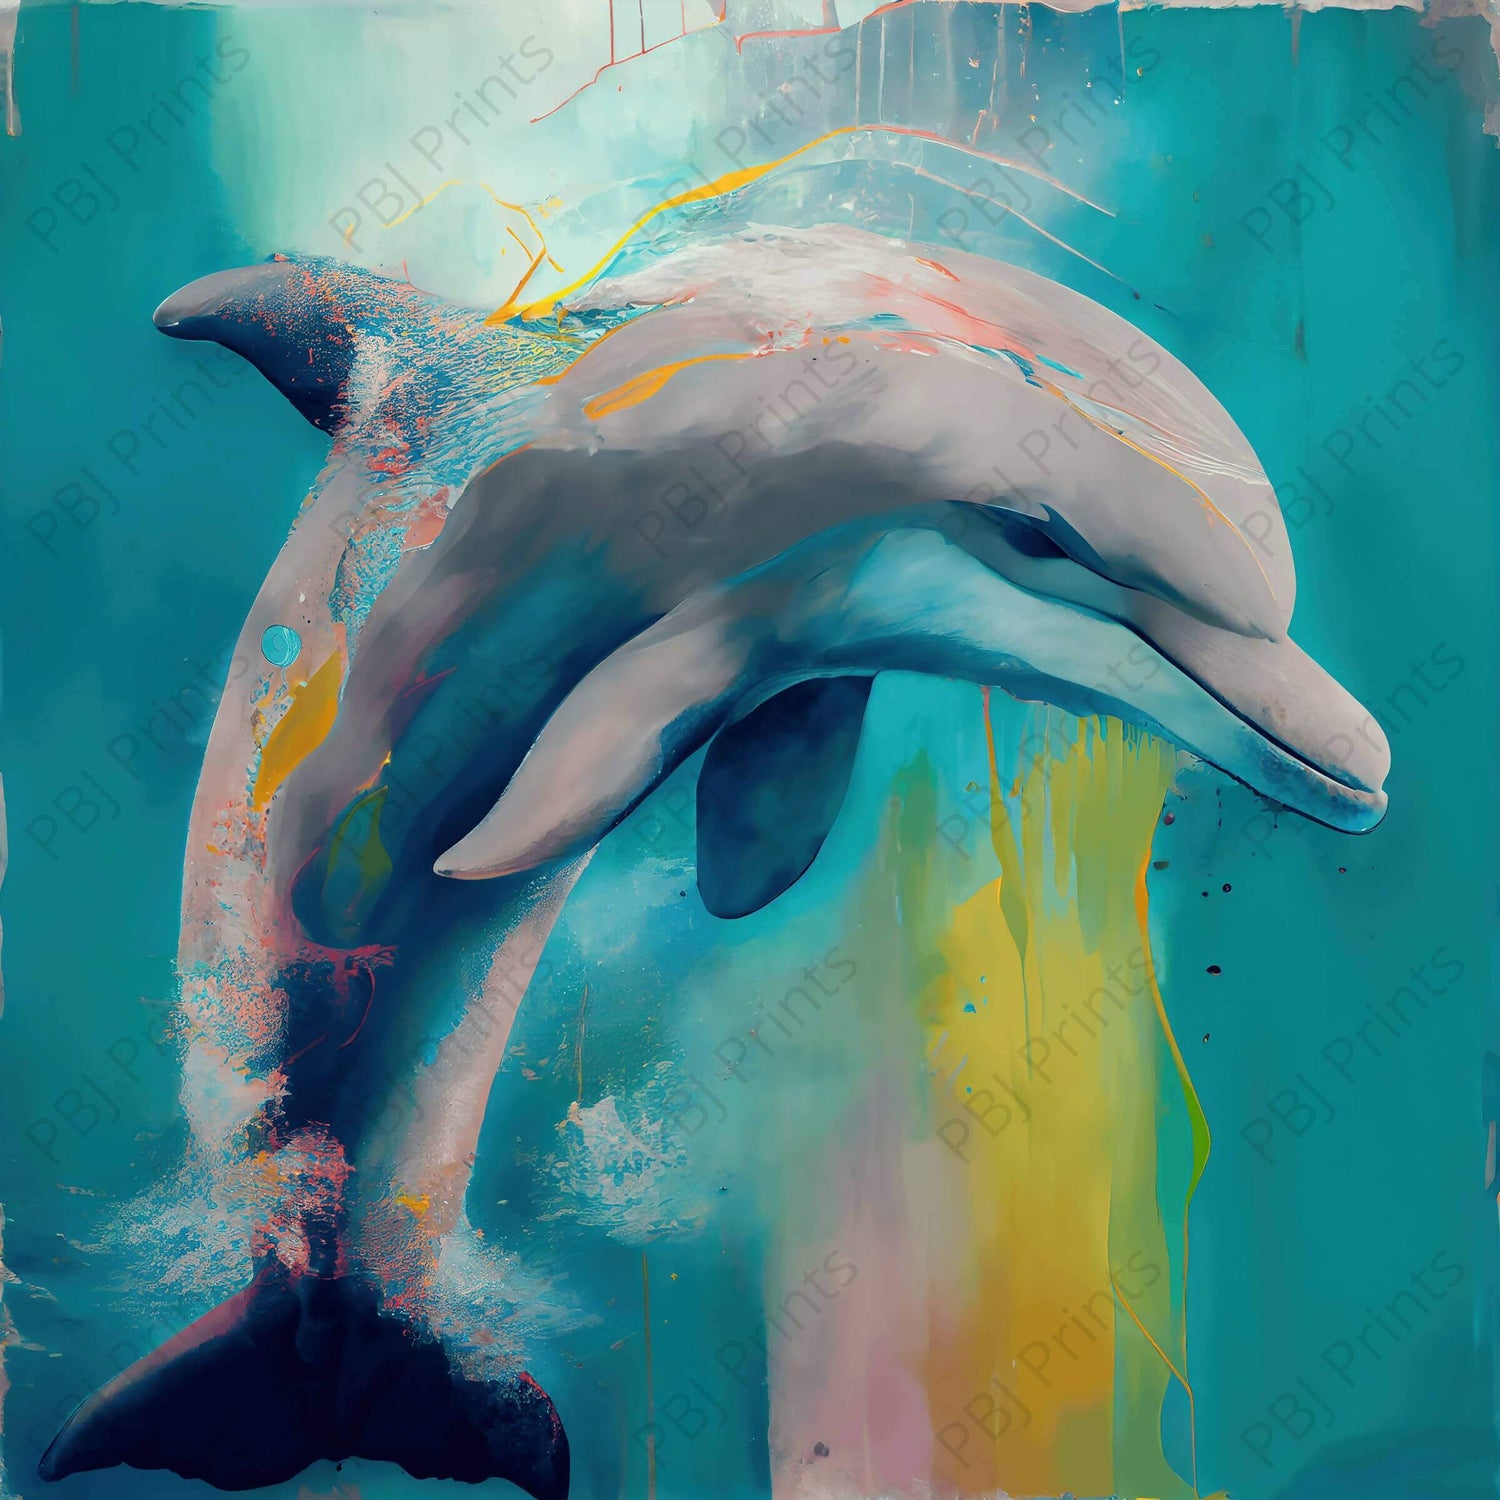 Colorful Dolphin Right Facing - Artist by Whimsykel Designs - Art Prints, Decoupage Rice Paper, Flat Canvas, Photo Prints, Poster Prints, Shop All